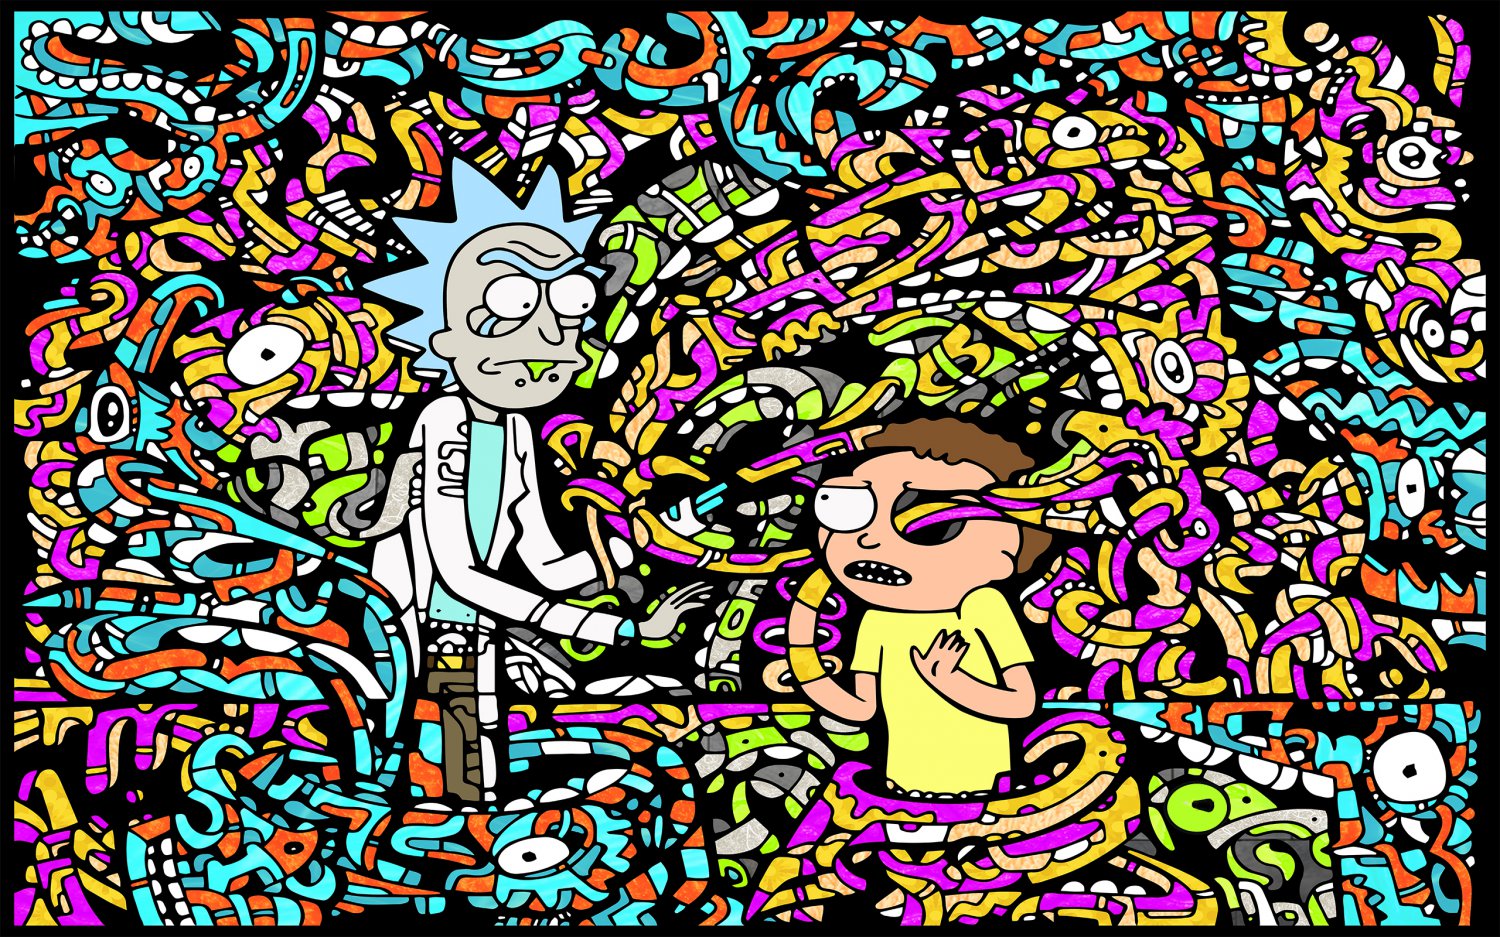 Rick and Morty  18"x28" (45cm/70cm) Poster